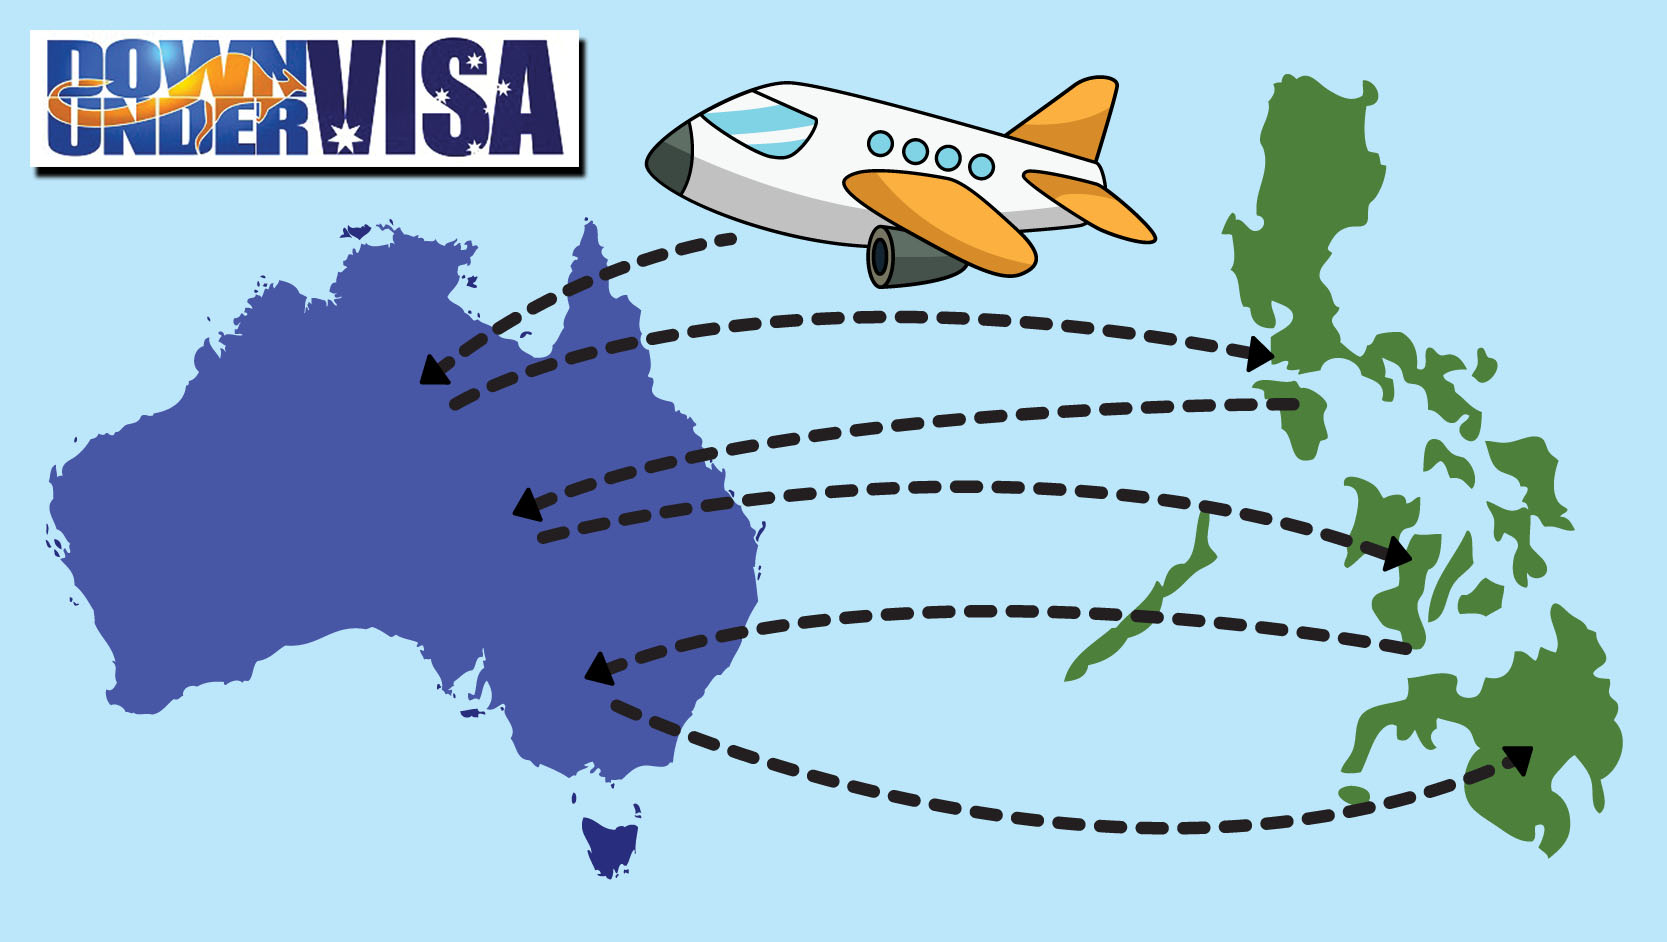 tourist visa to australia from philippines 2022 processing time